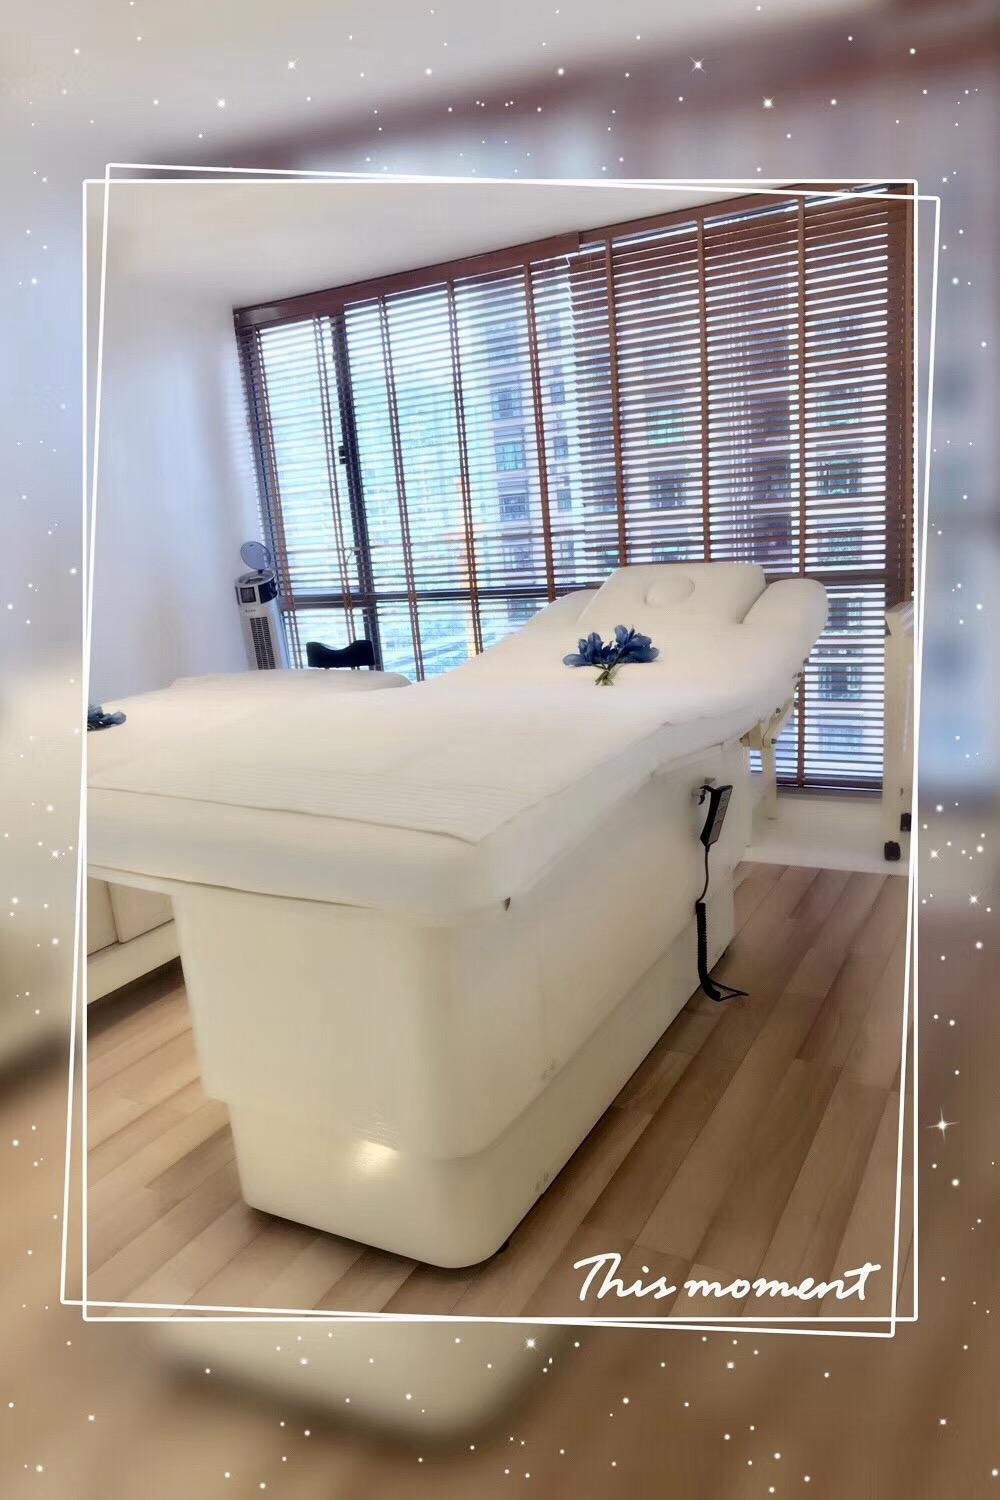 Electric Beauty massage bed 4